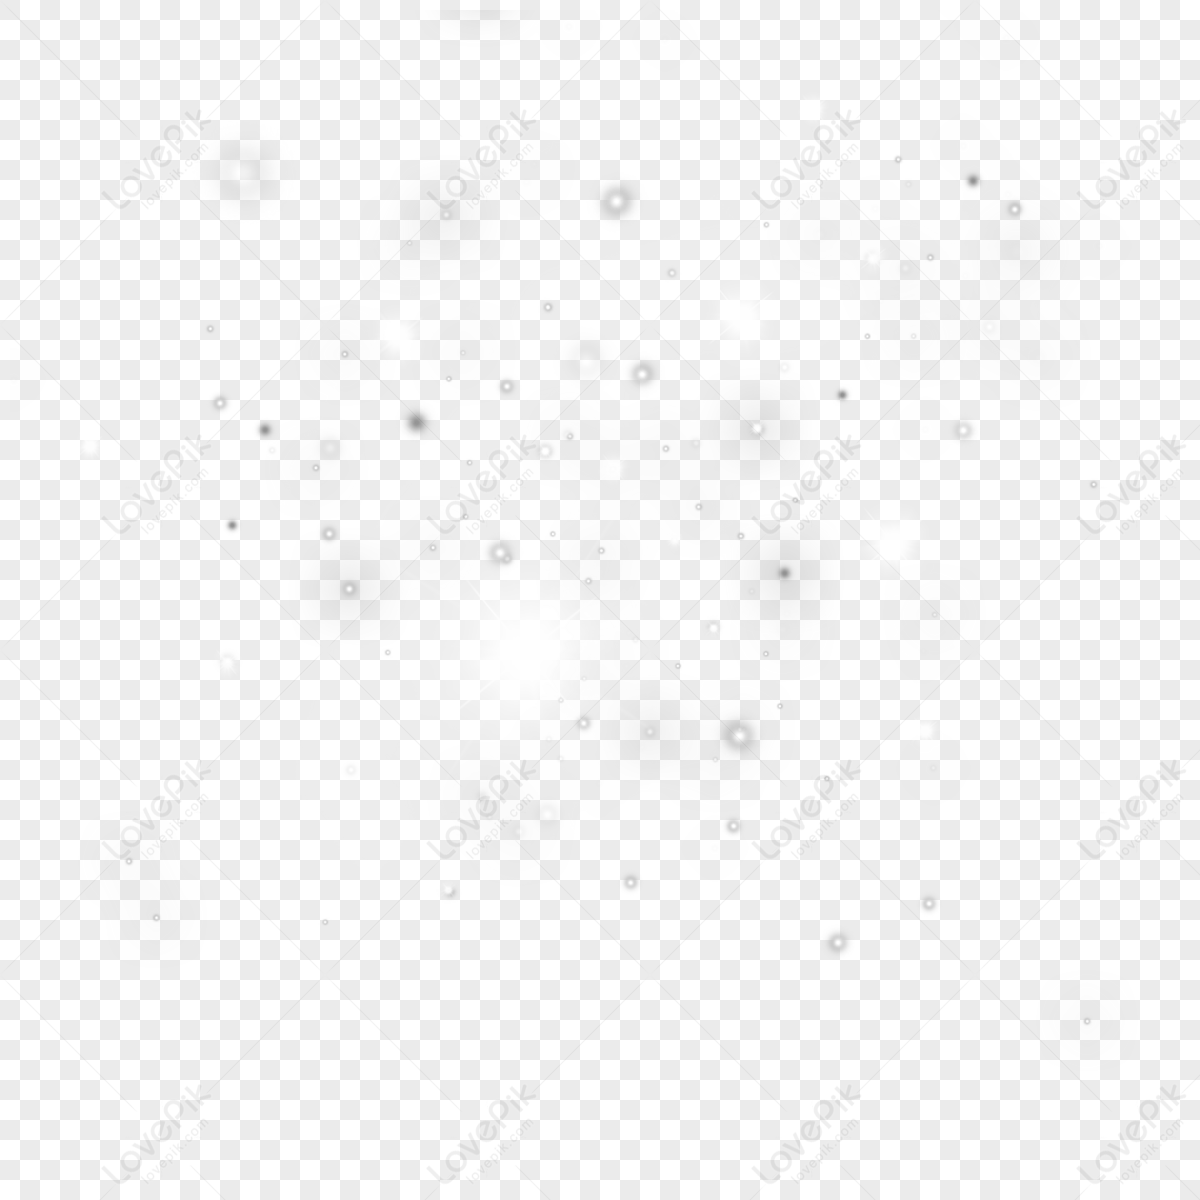 Star Element Glow Effect,glowing Stars,superimposed,gradient PNG ...